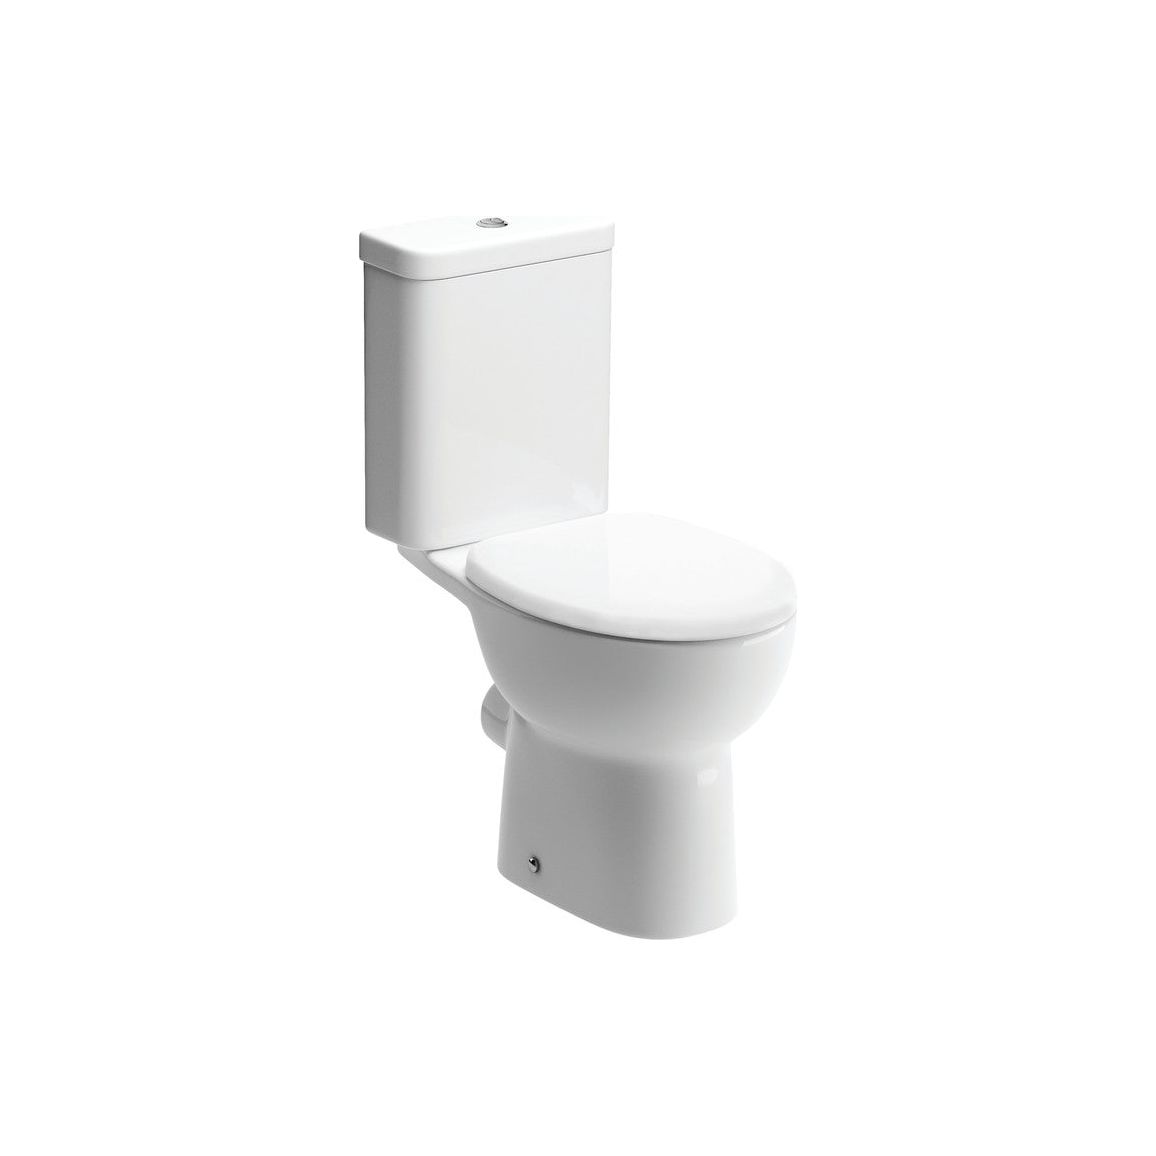 Opobo Soft Close Seat - White Weight